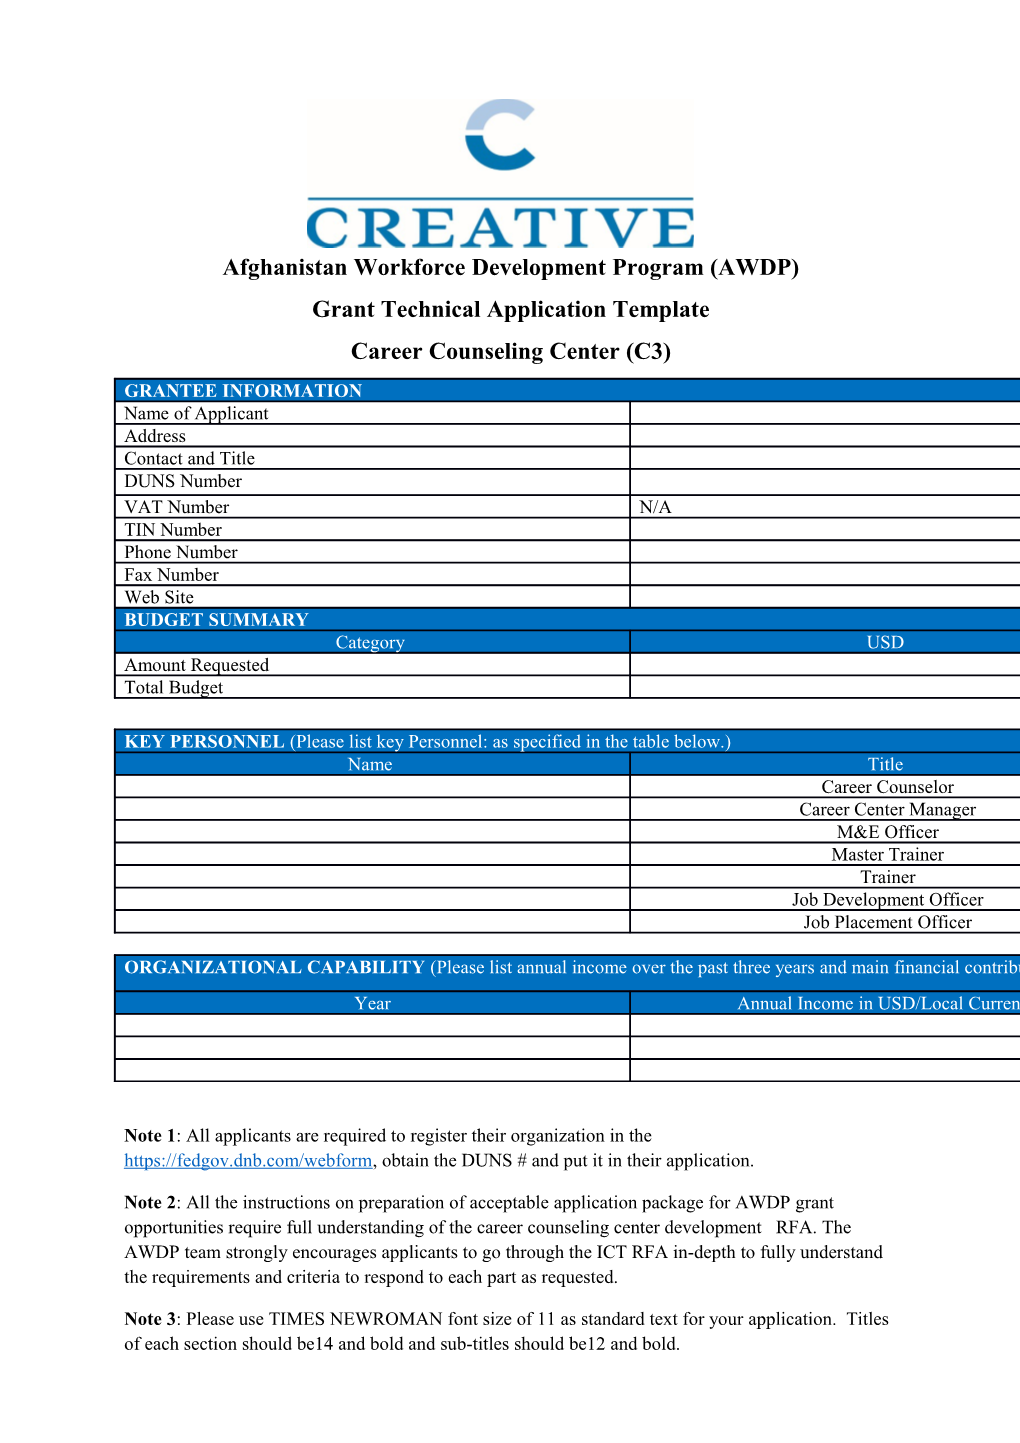 Grant Technical Application Template